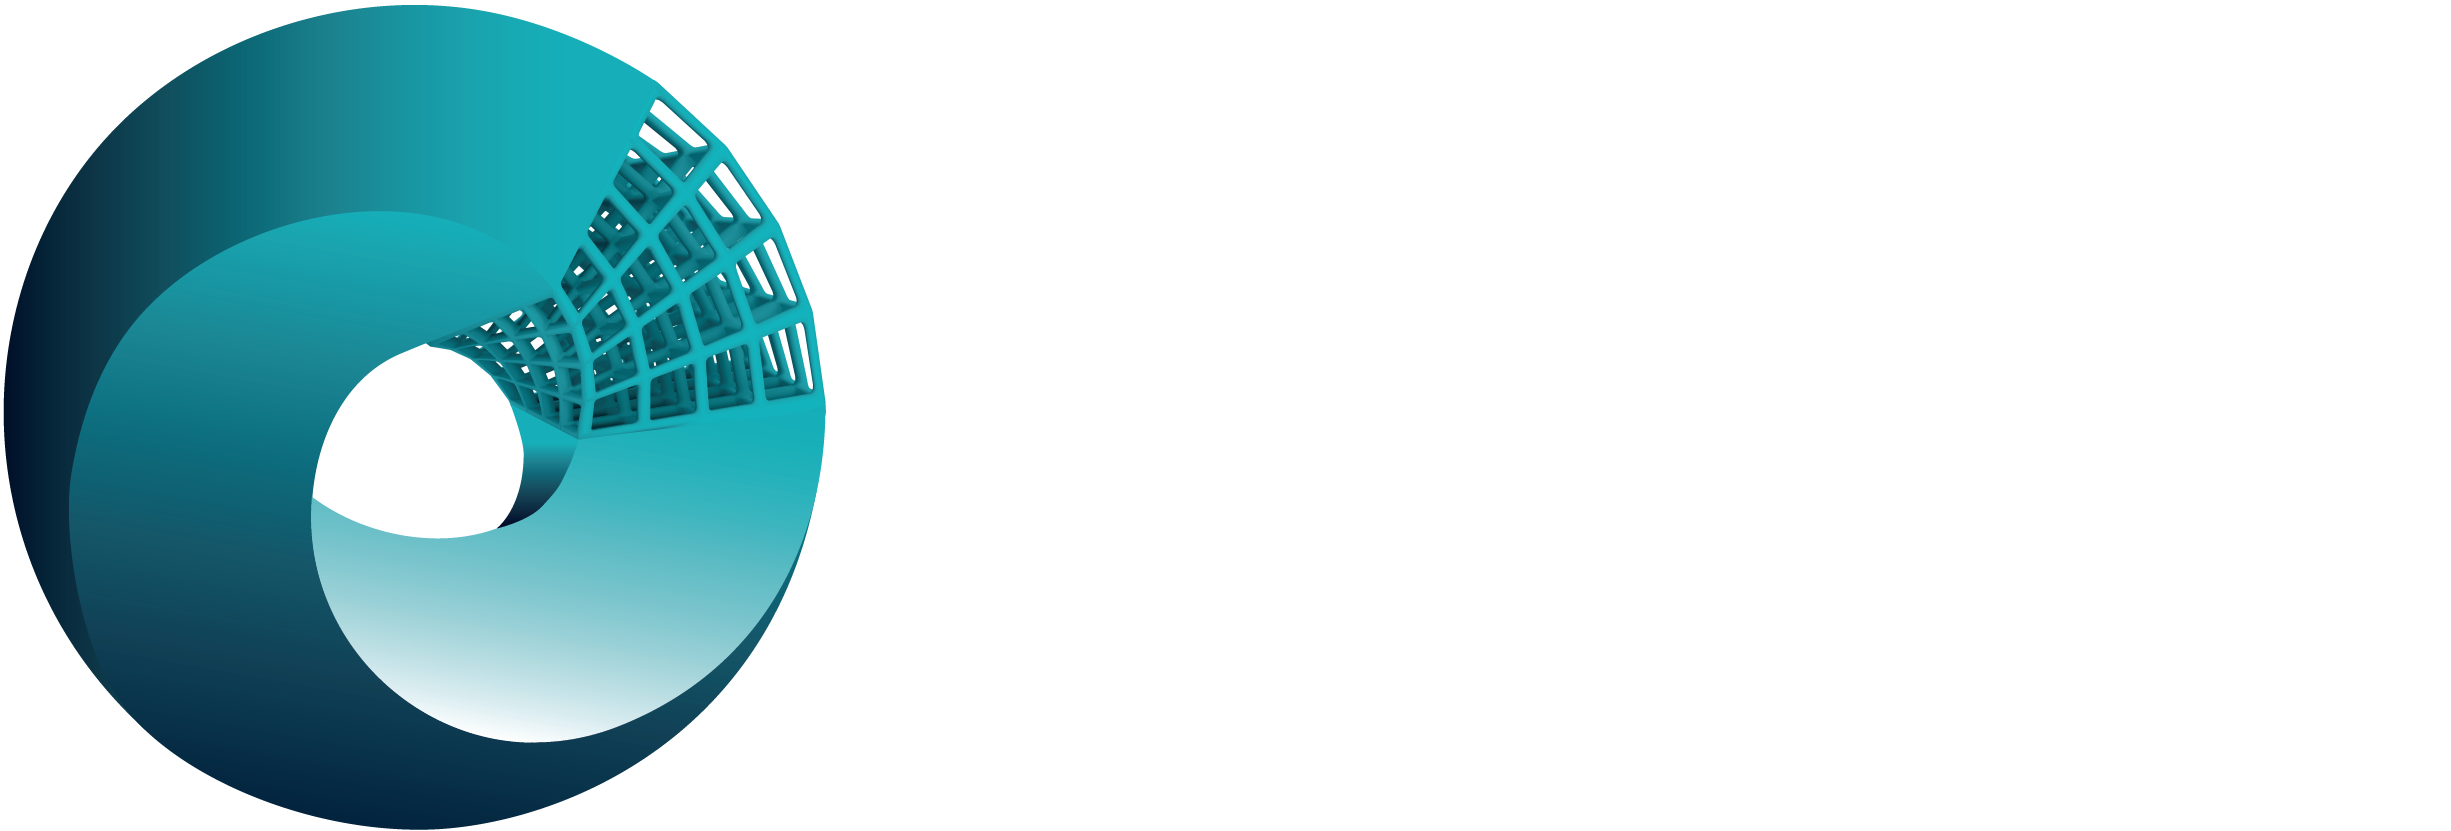 ARC Industrial Transformation Training Centre for Additive Biomanufacturing